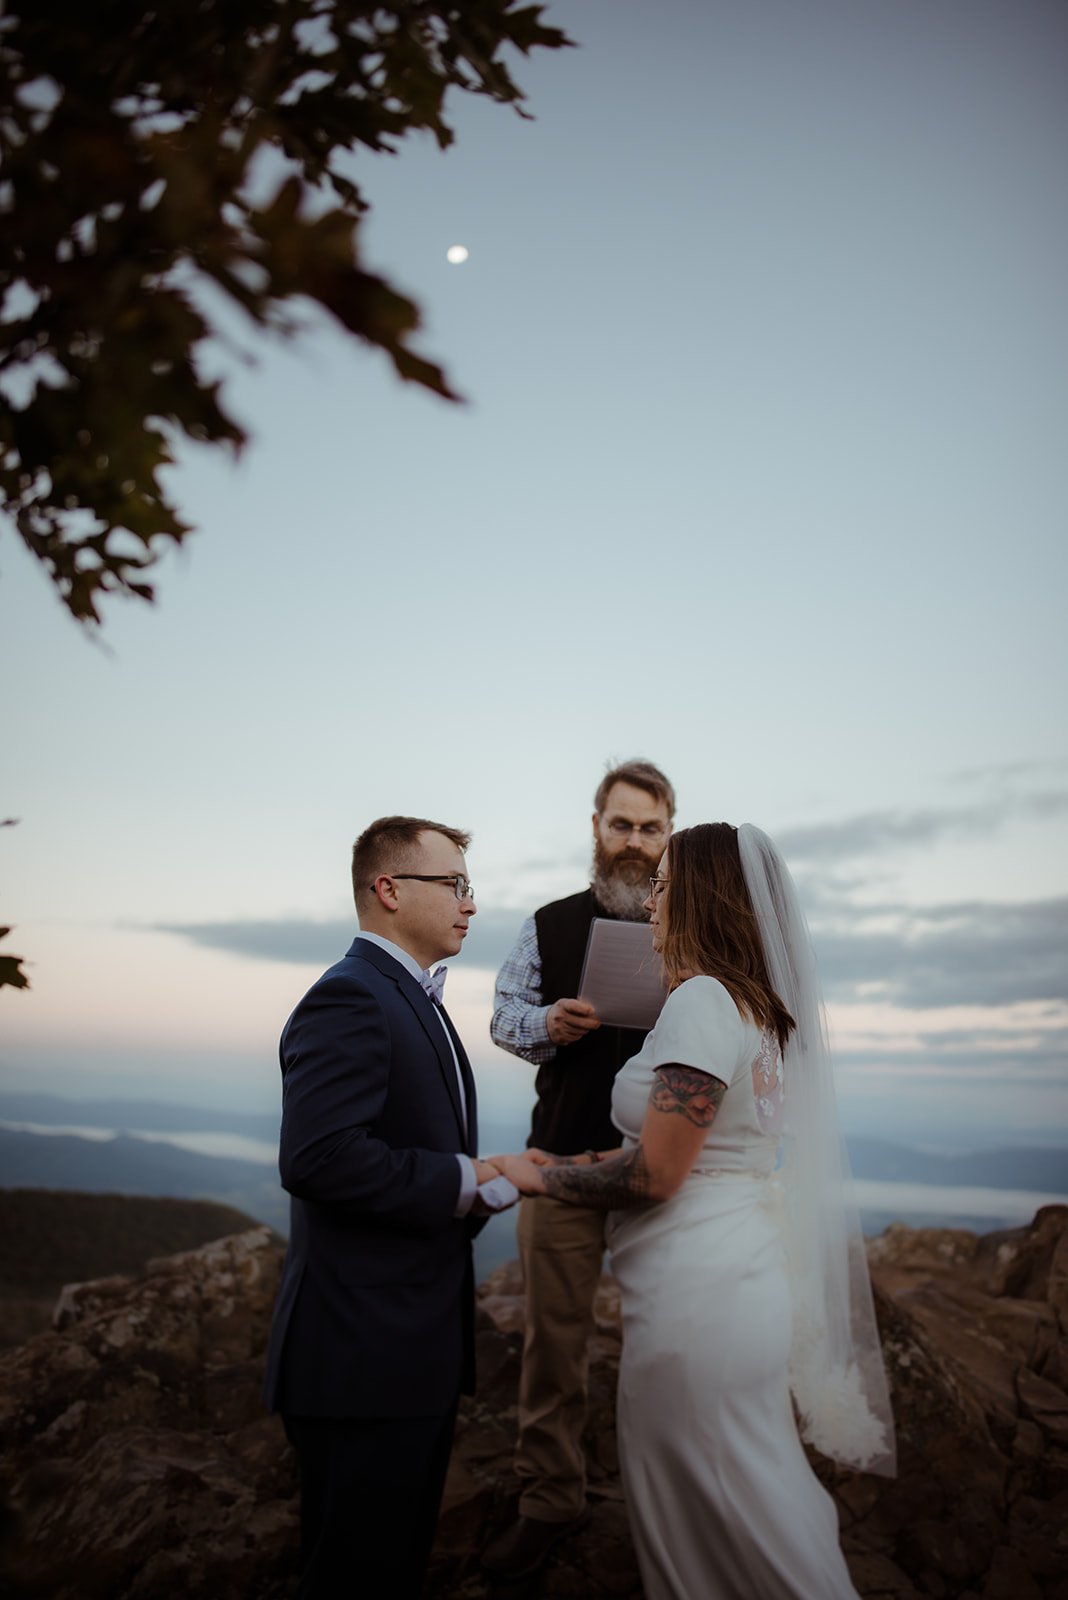 Shenandoah National Park Hiking Elopement with Guests - White Sails Creative_16.jpg